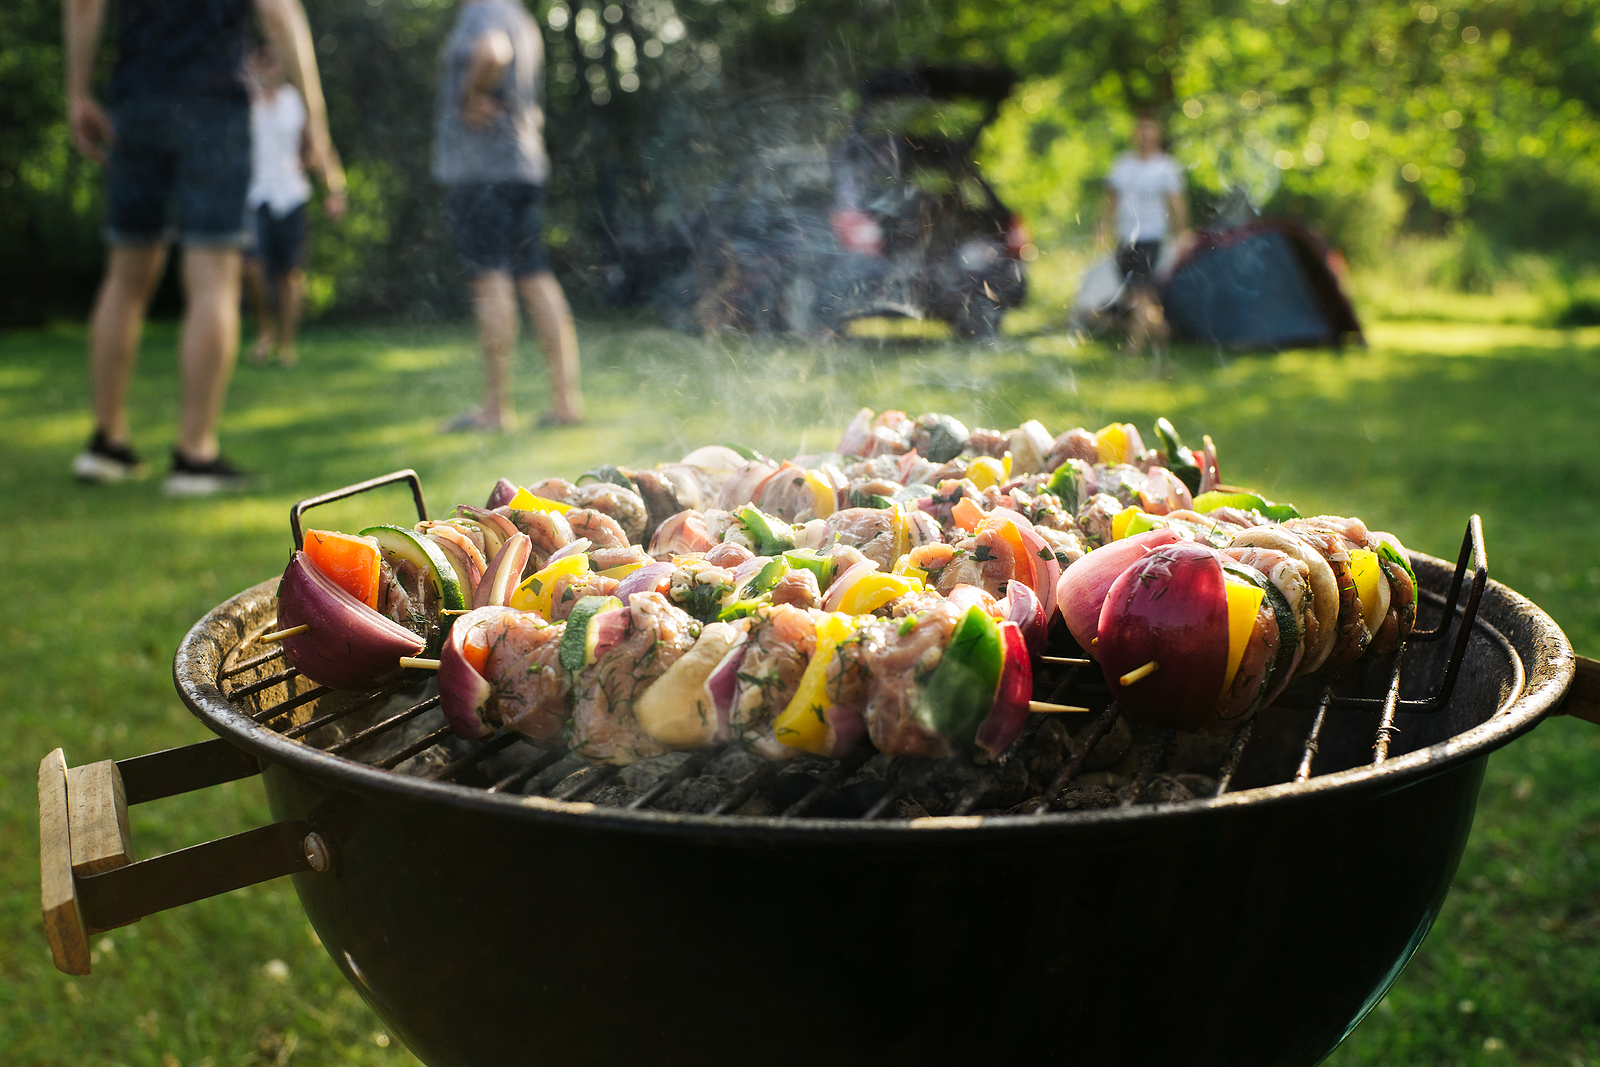 How To Get Your Garden BBQ Ready Without Taking all Day